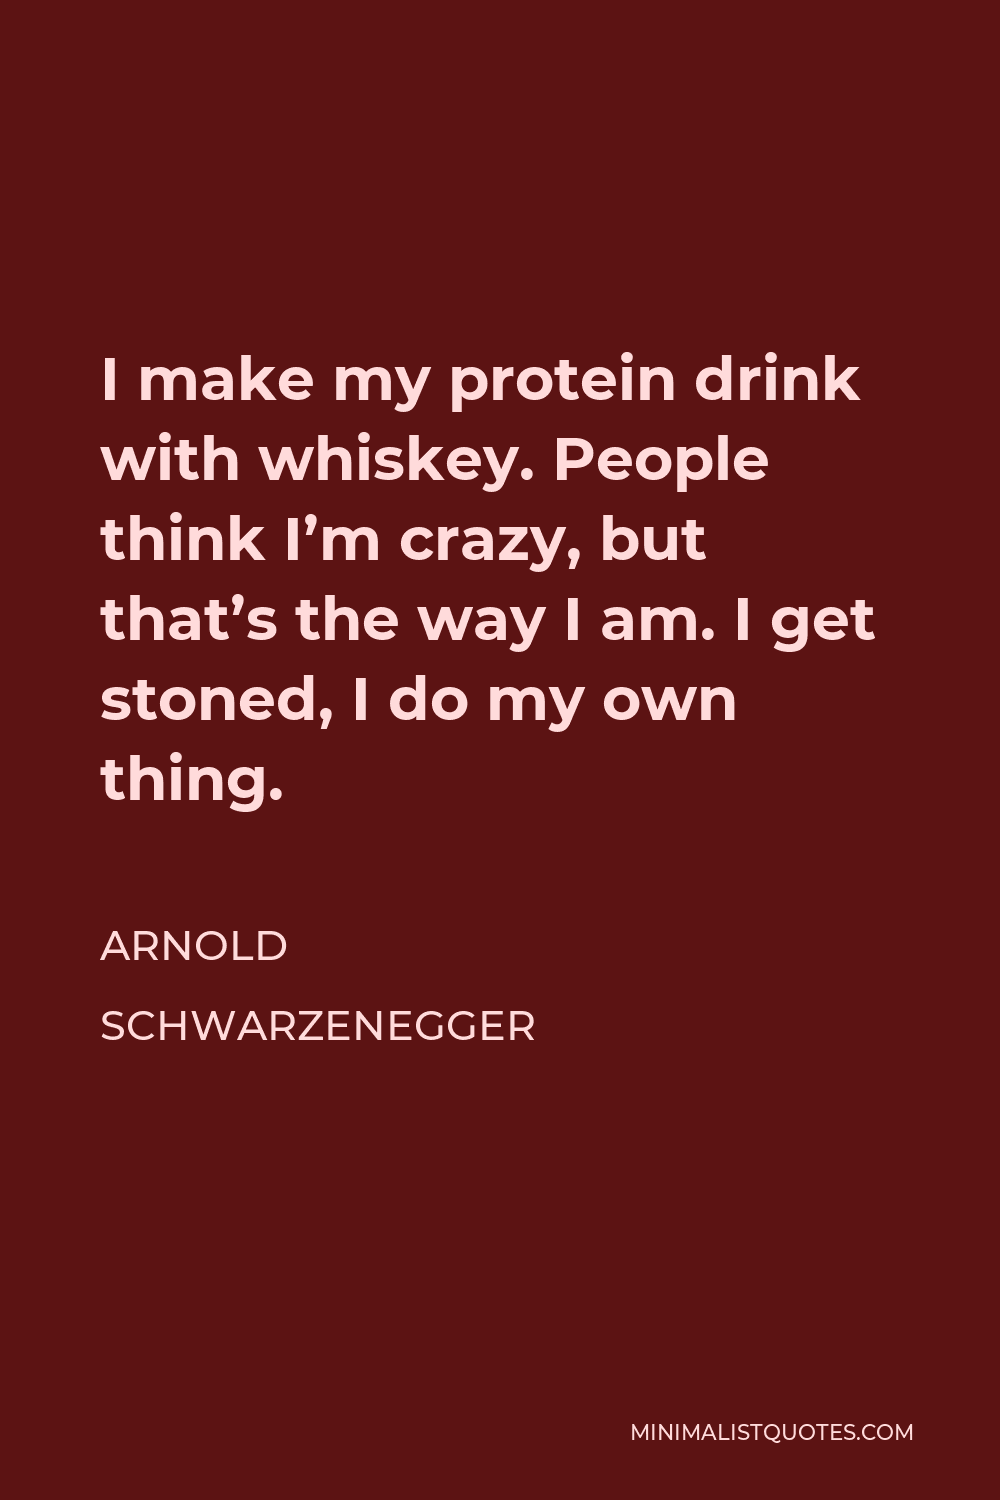 Arnold Schwarzenegger Quote - I make my protein drink with whiskey. People think I’m crazy, but that’s the way I am. I get stoned, I do my own thing.